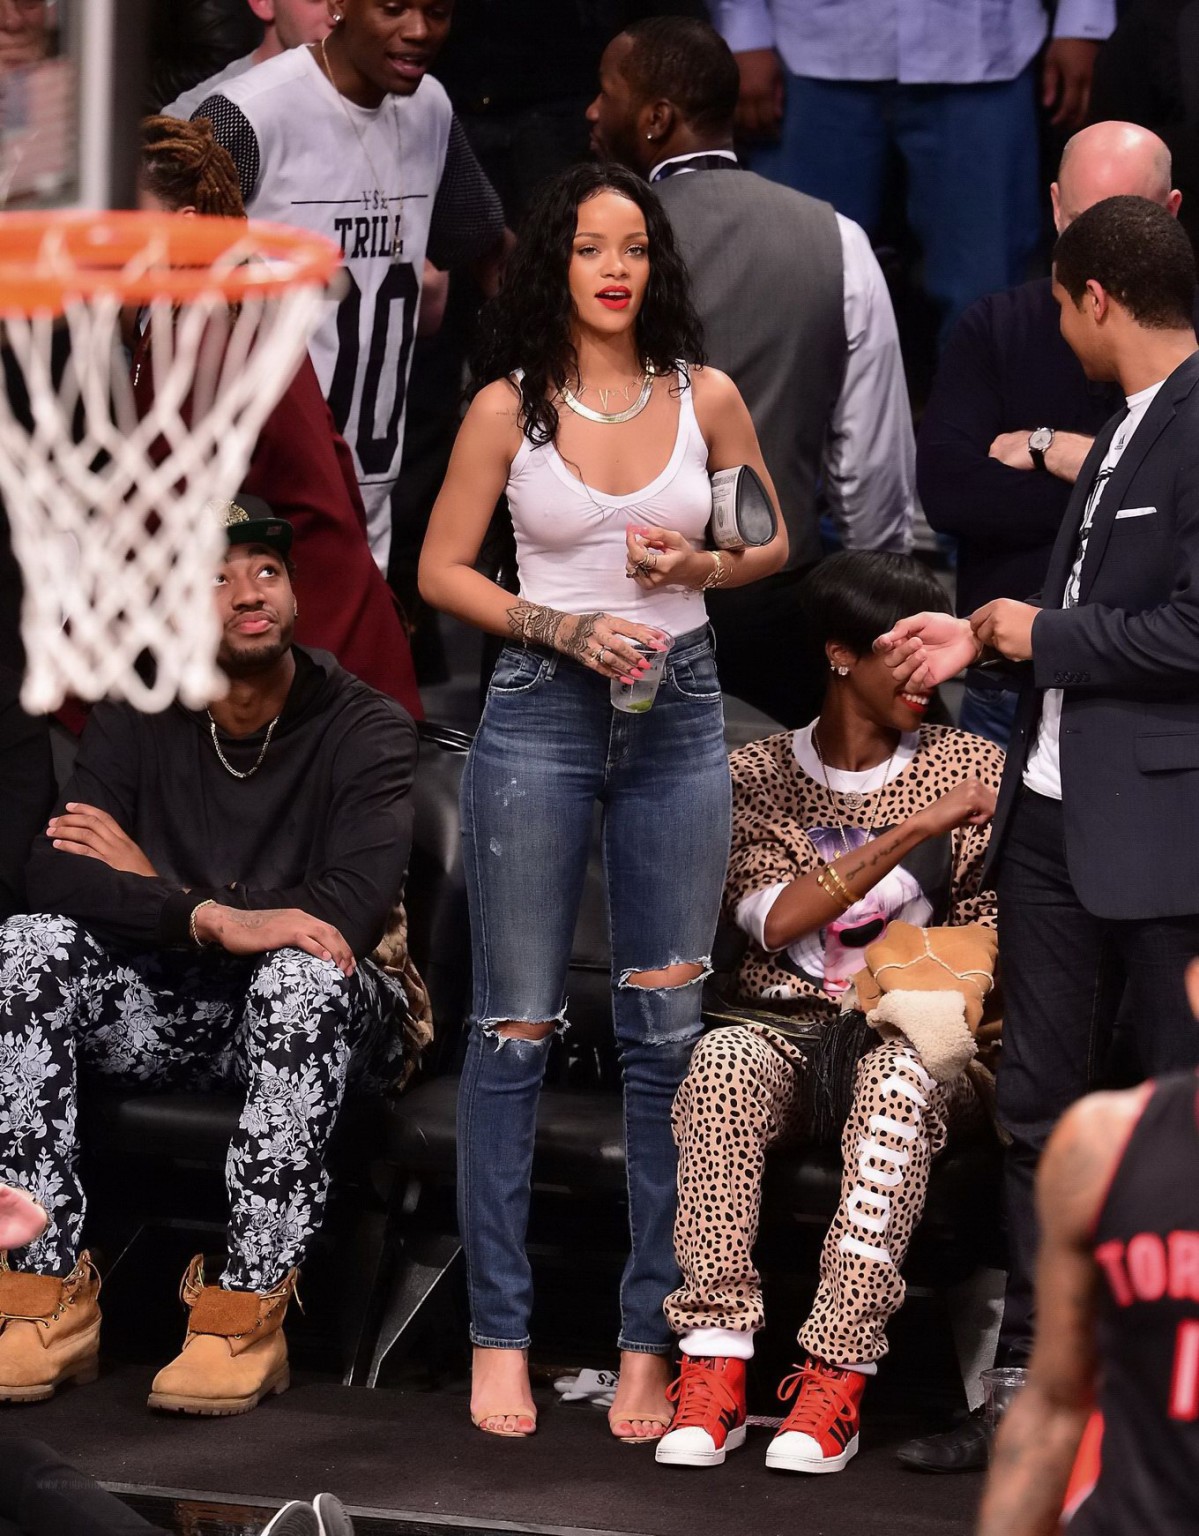 Rihanna shows off her boobs in seethru top at a basketball game in NYC #75198020